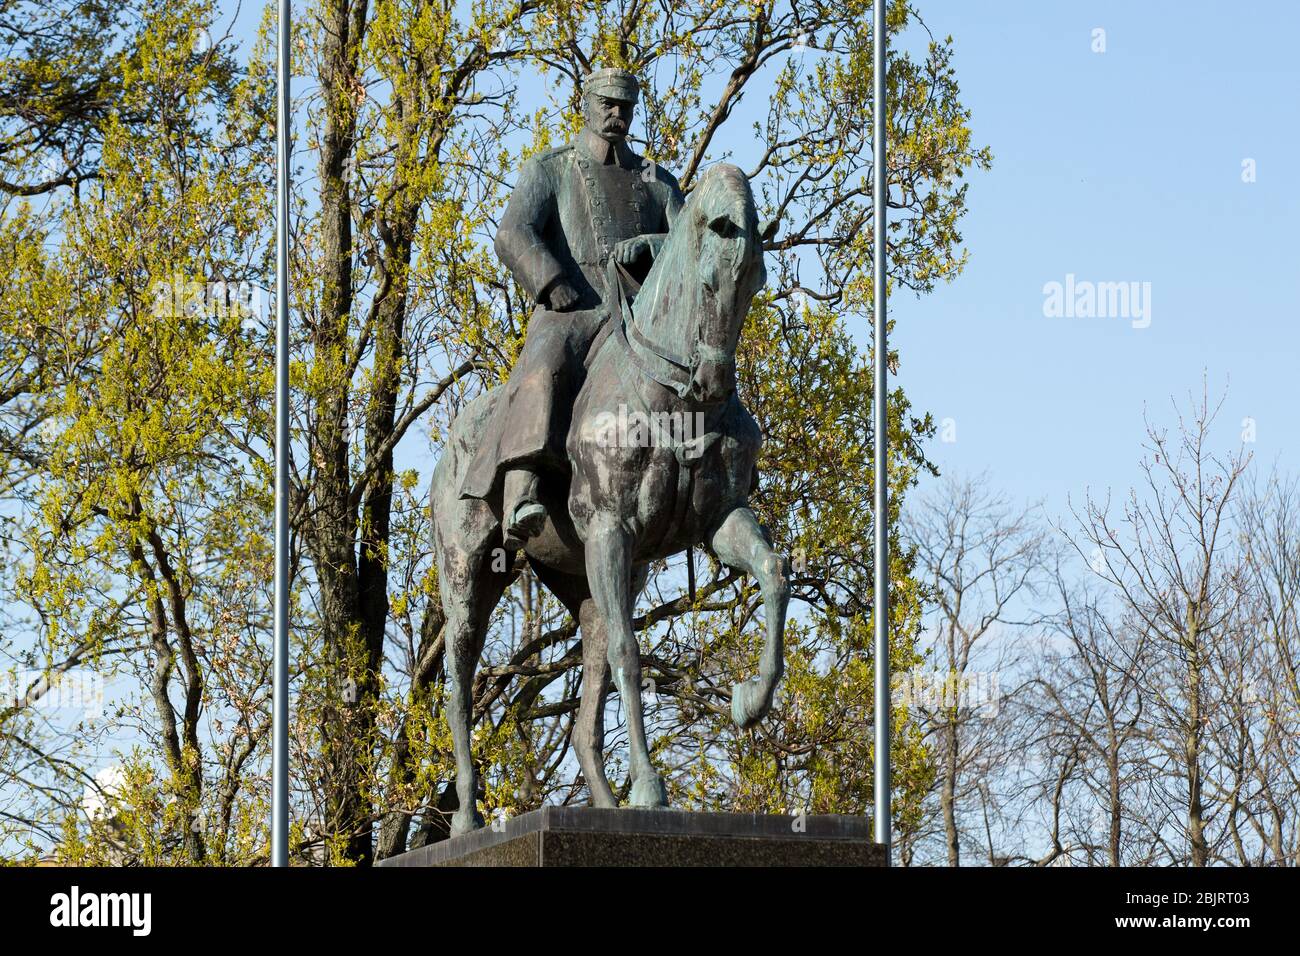 View of the Jozef Pilsudski Monument at the Plac Litewski (Litewski Square) during the Coronavirus (COVID-19) lockdown crisis.Due to coronavirus restrictions on movement, bars and restaurants are closed and the streets of Polish cities are depopulated. Stock Photo